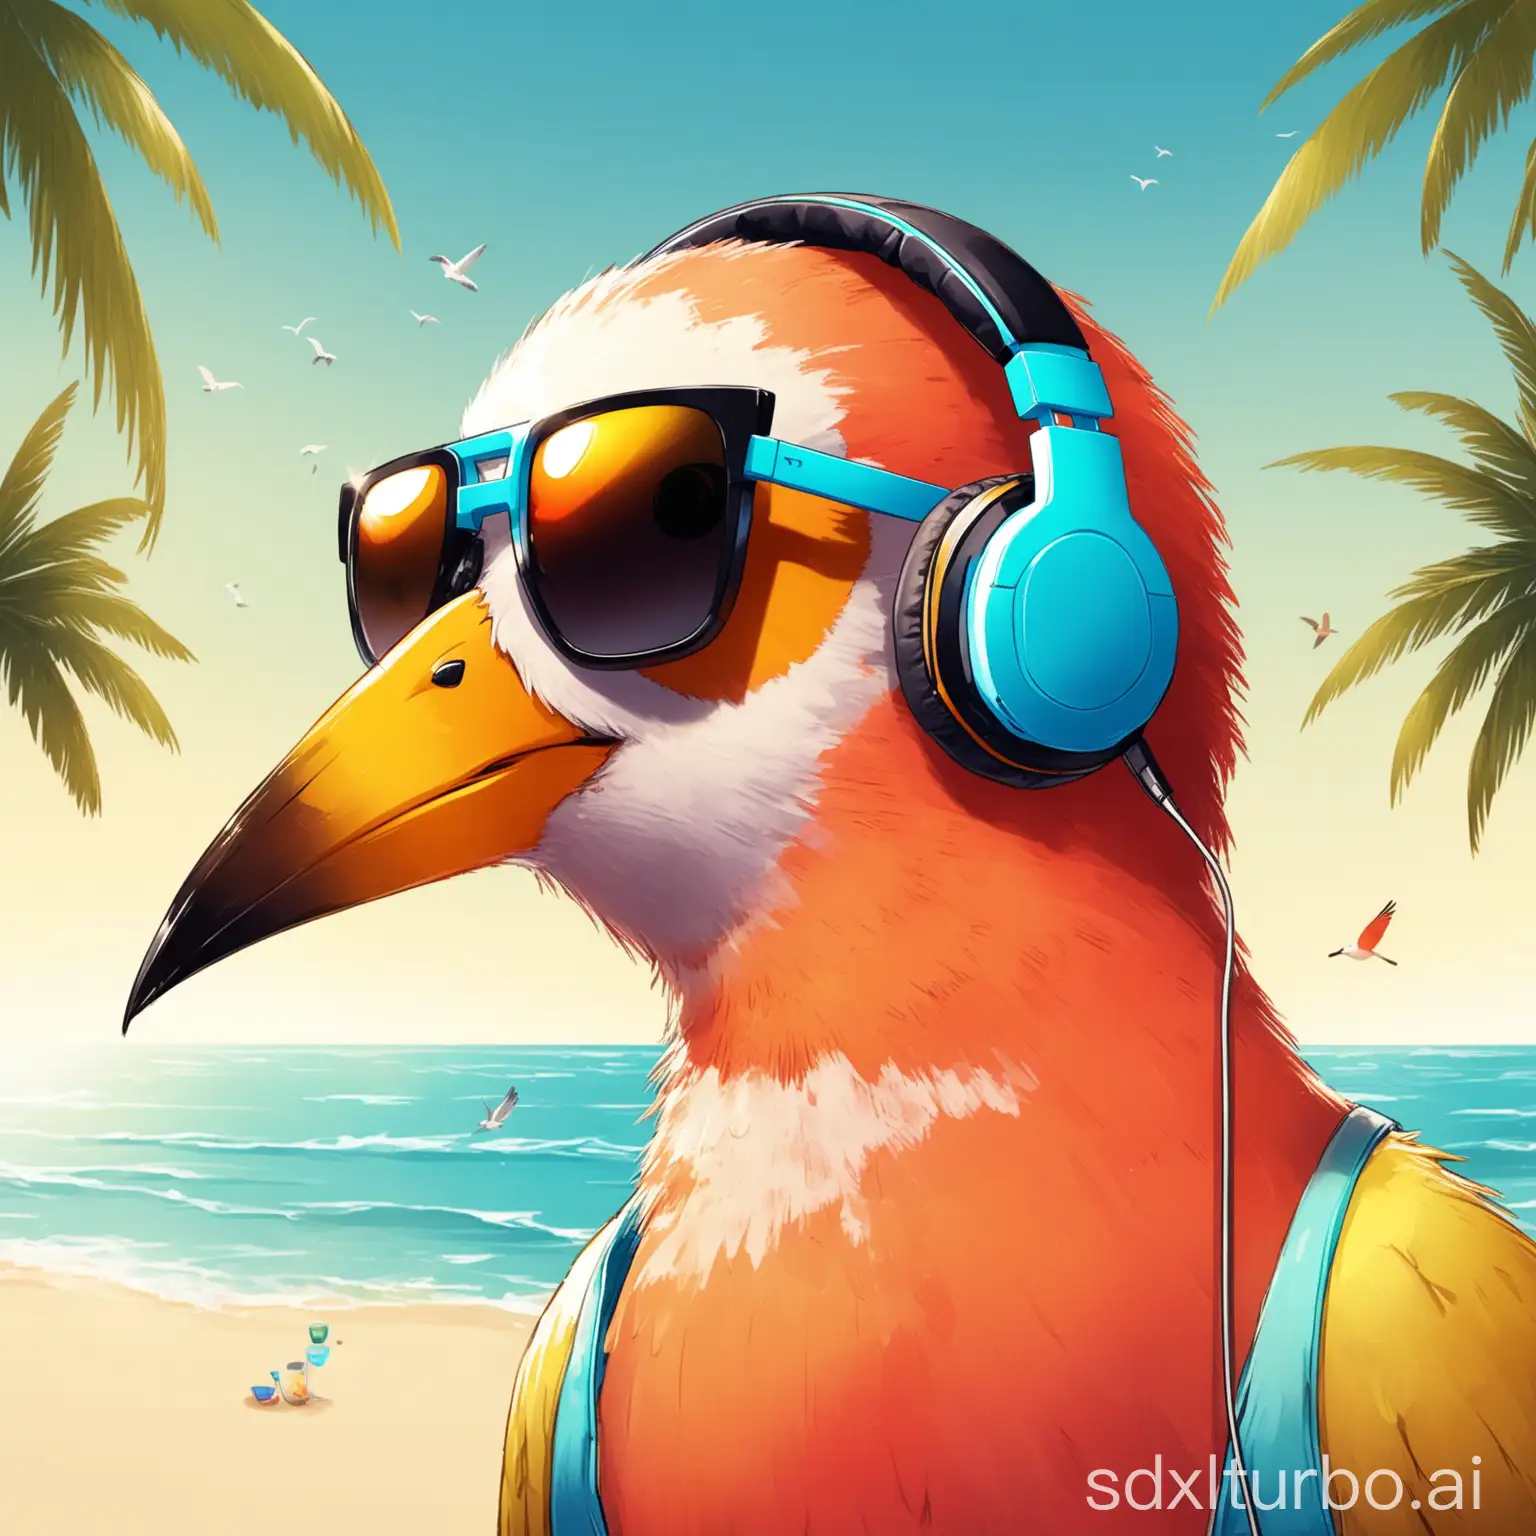 Cool-Beach-Bird-with-Headphones-and-Sunglasses-Partying